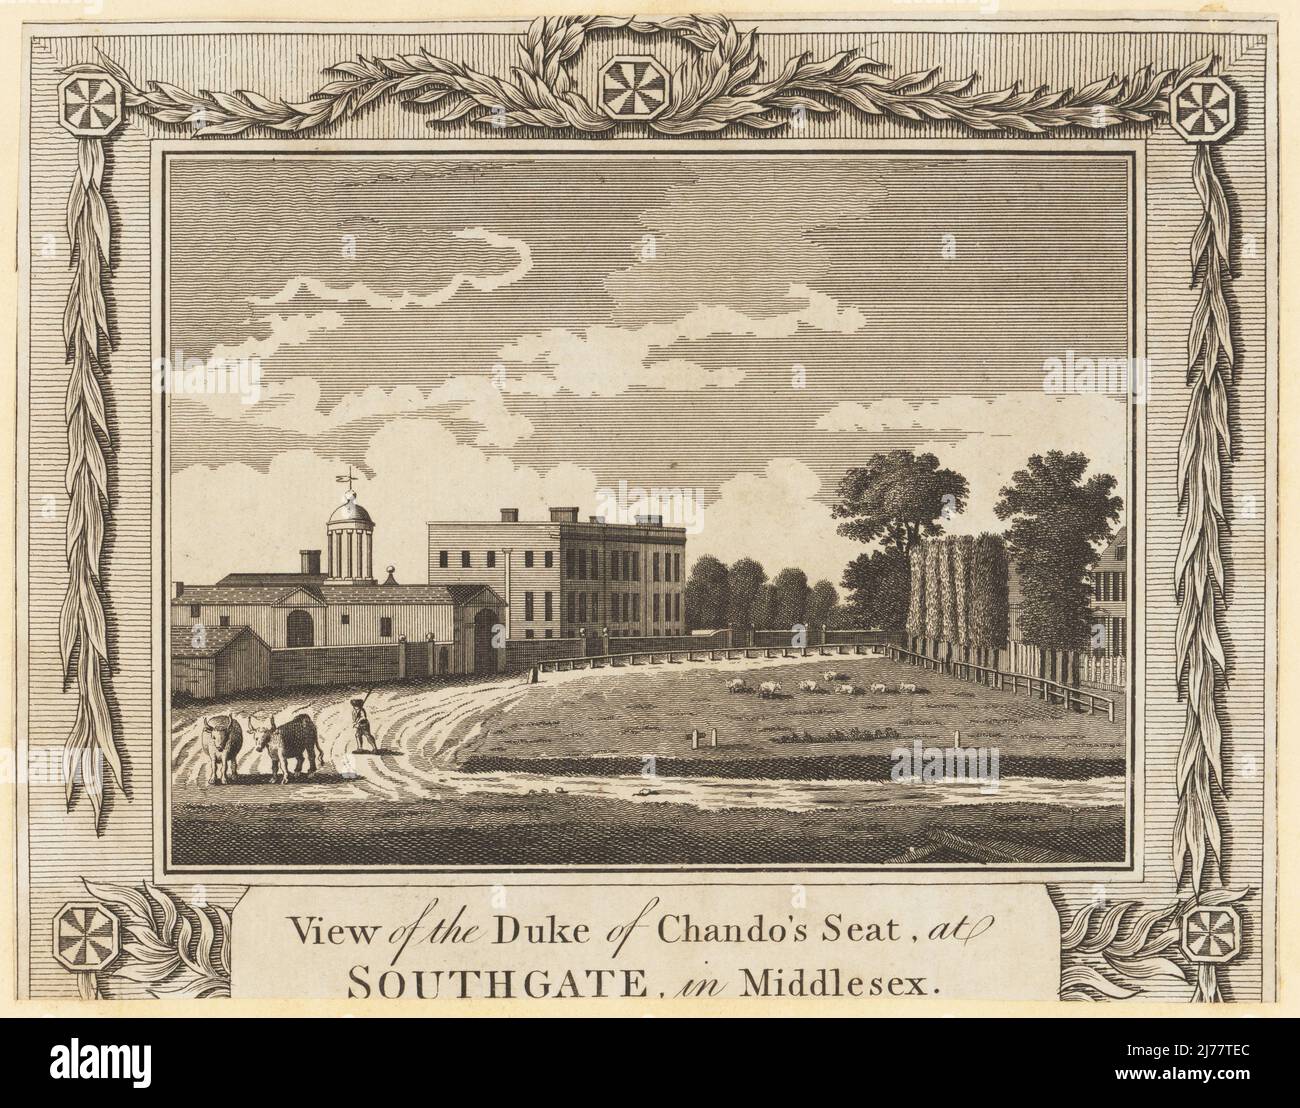 View of Minchington Hall, Southaget, Middlesex, 1784. Seat of James Brydges, 3rd Duke of Chandos, slave owner of the Hope Estate, Jamaica. House demolished in 1853. Copperplate engraving by Roberts from William Thornton’s New History and Survey of London, published by Alexander Hogg at the King’s Arms, Paternoster Row, London, 1784. Stock Photo